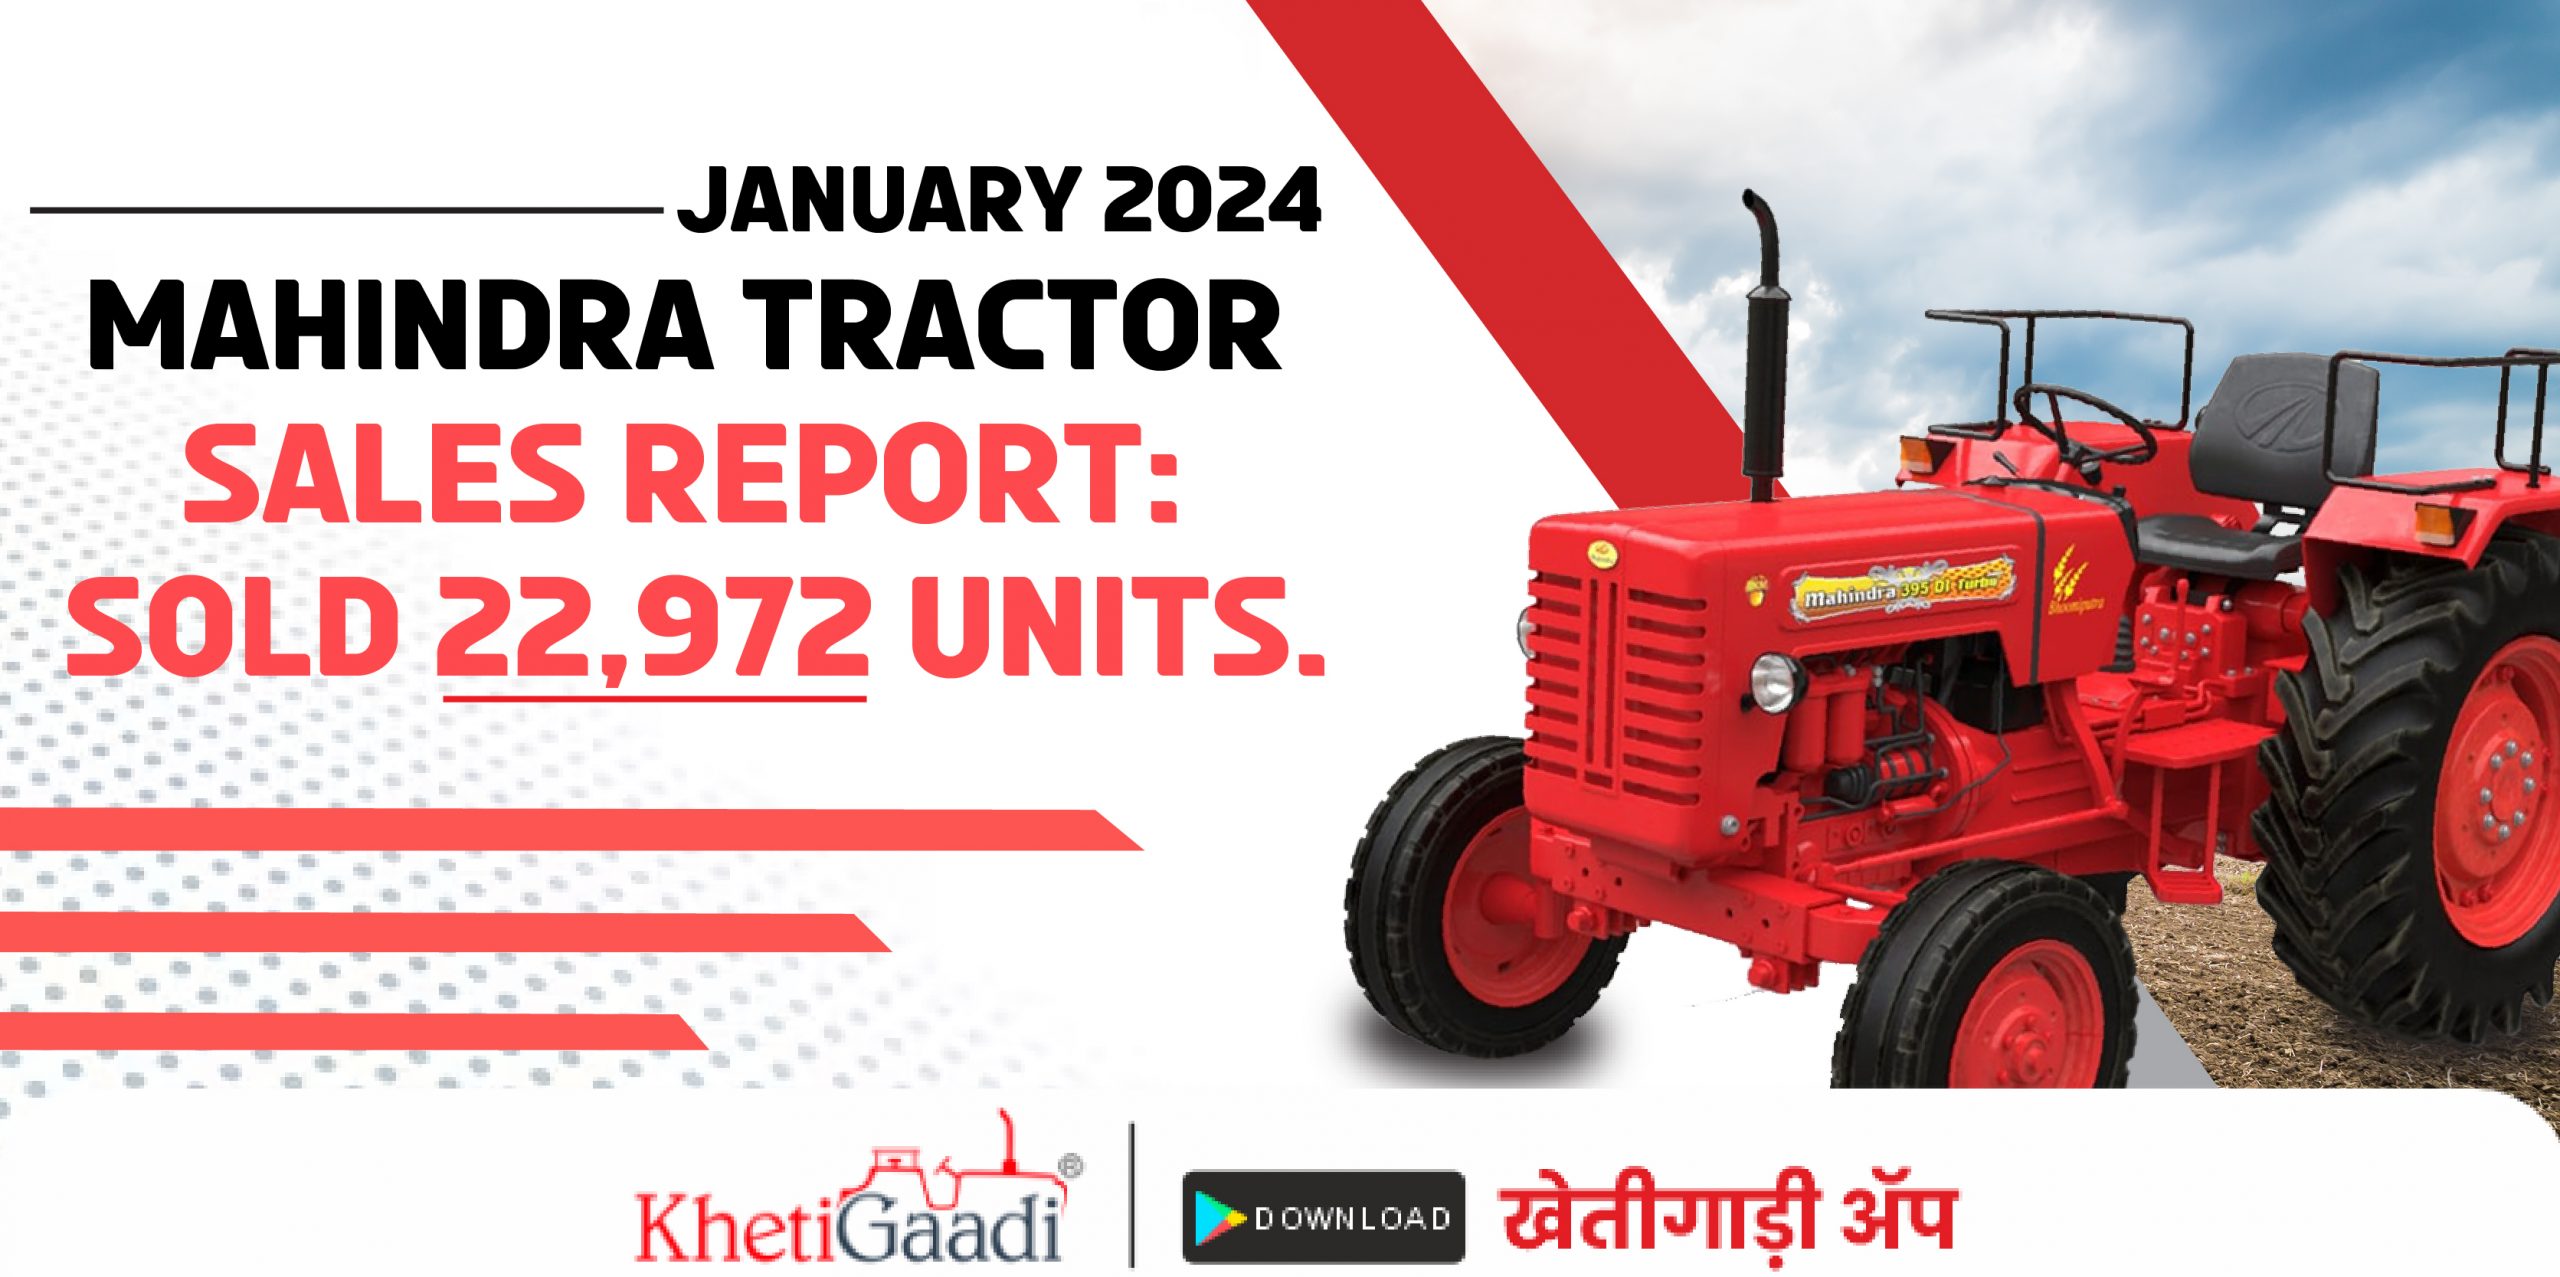 January 2024 Mahindra Tractor Sales Report: Sold 22,972 Units.